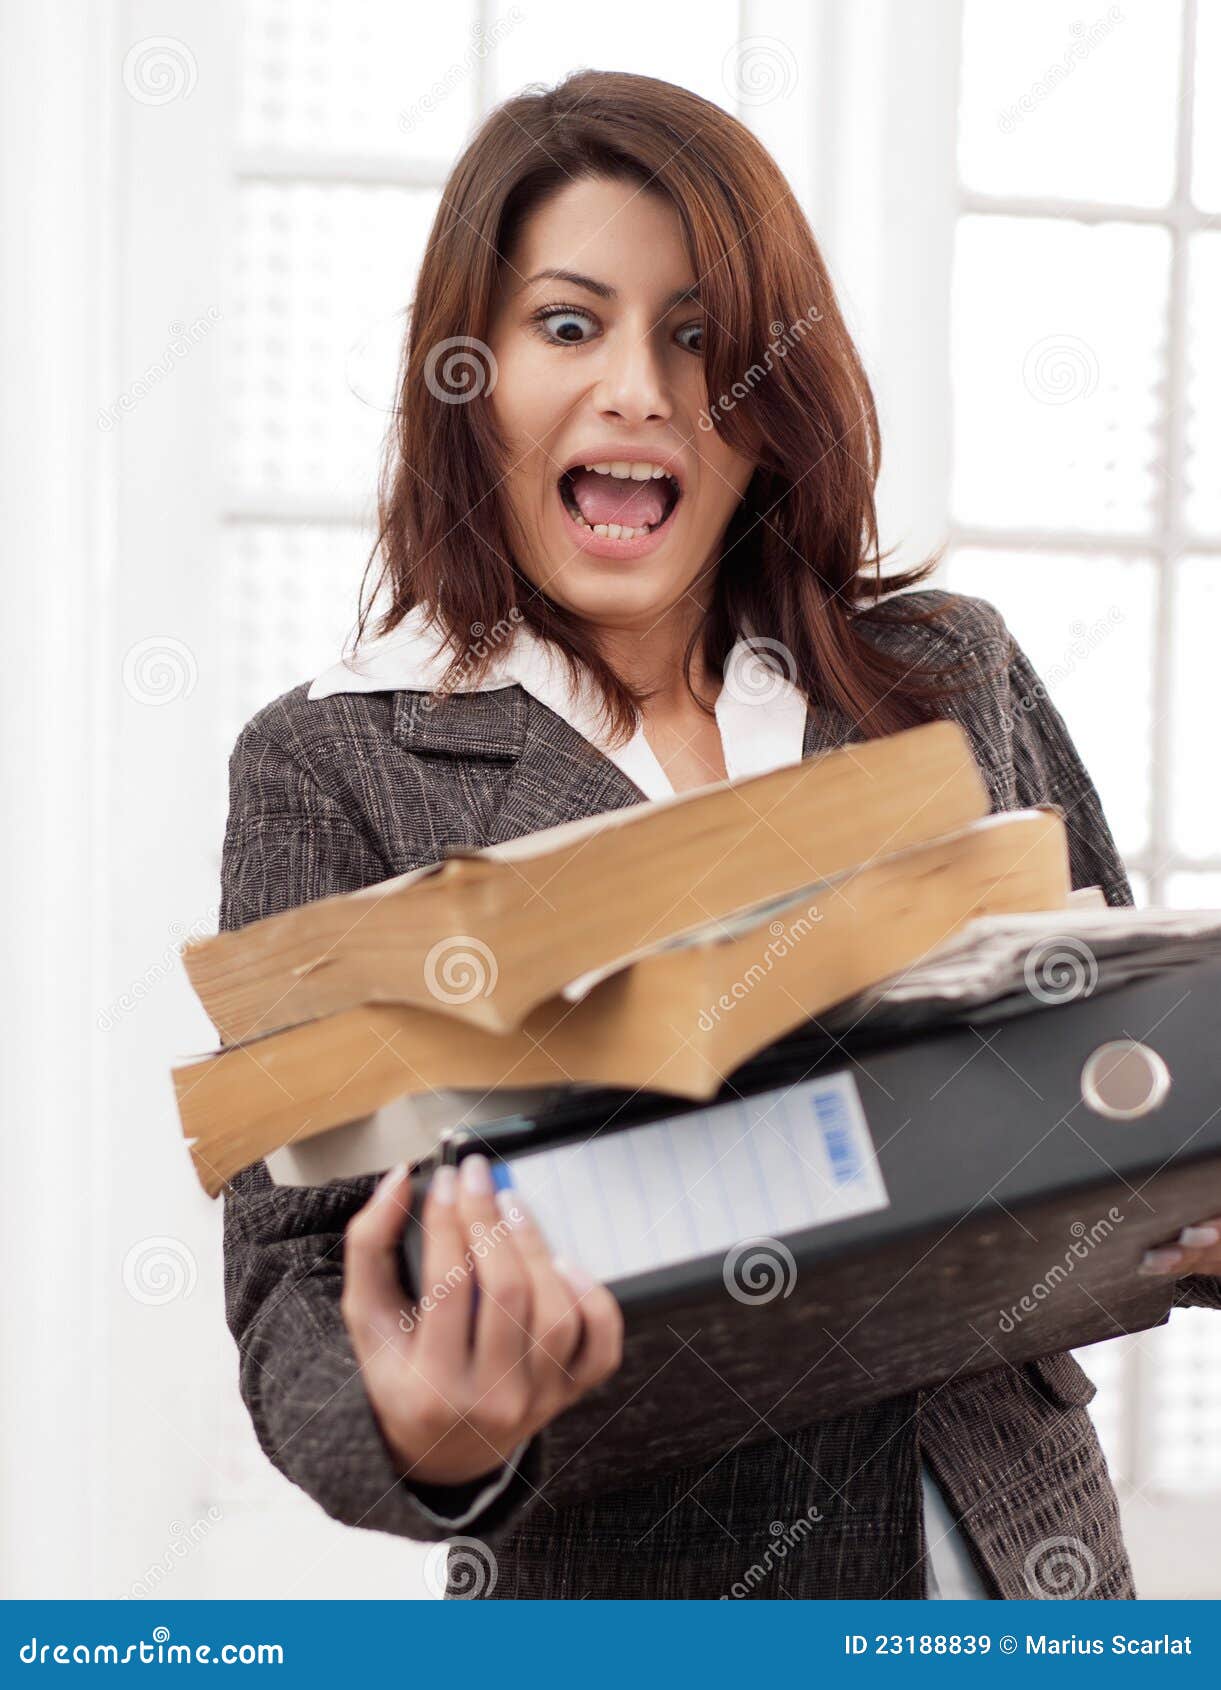 woman dropping documents